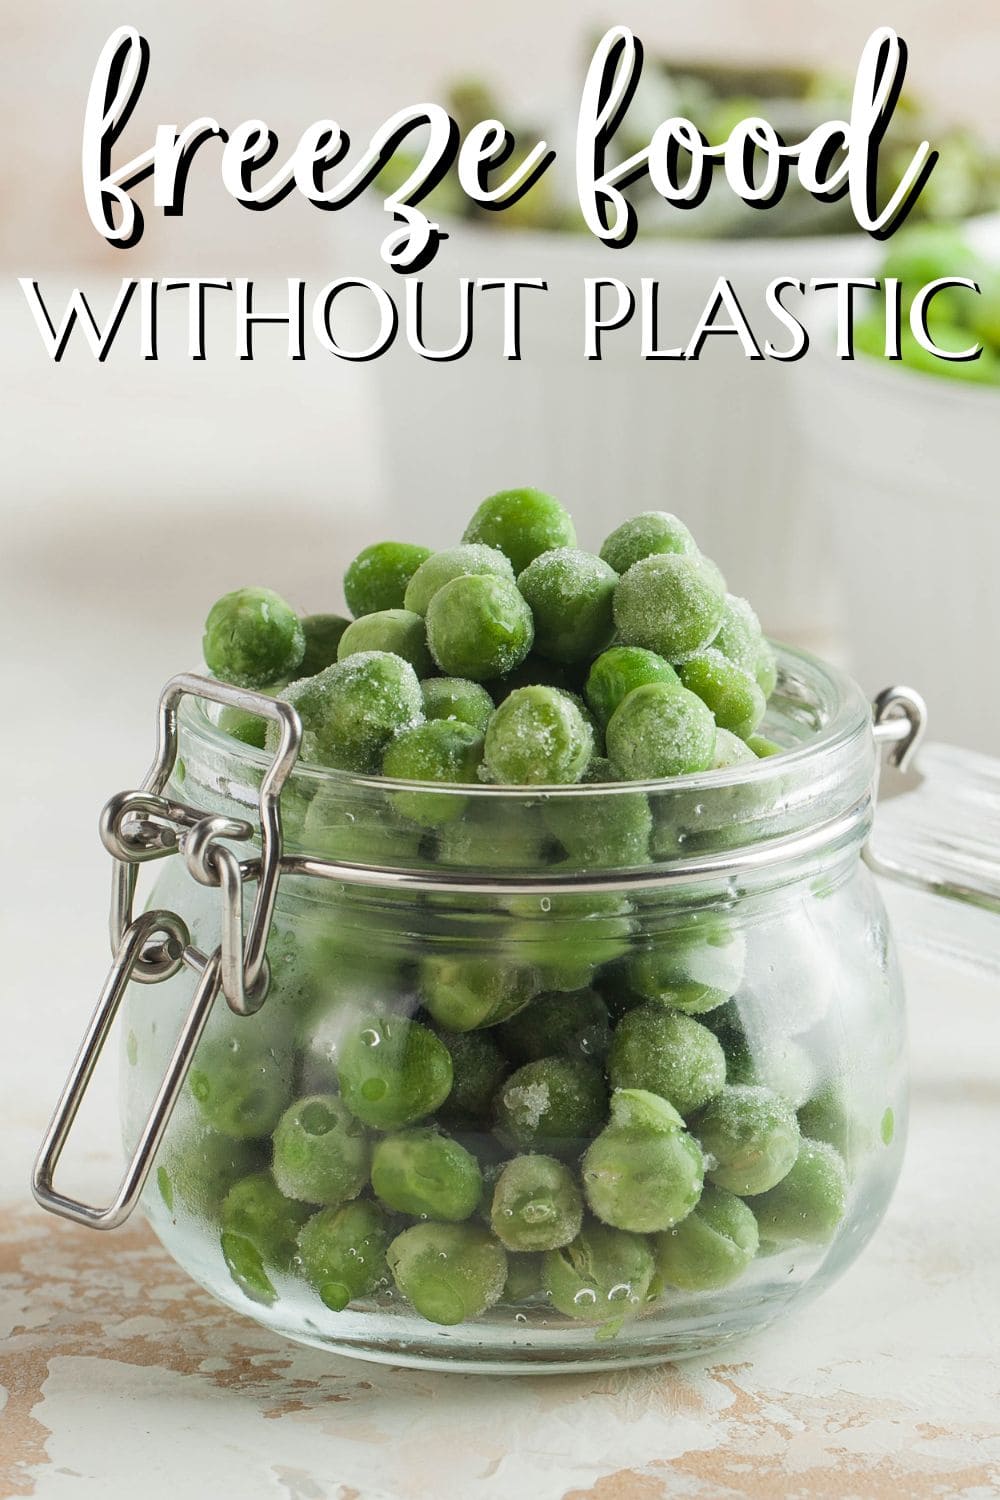 Why You Should Switch To Plastic-Free Microwave Food Covers - I'm Plastic  Free